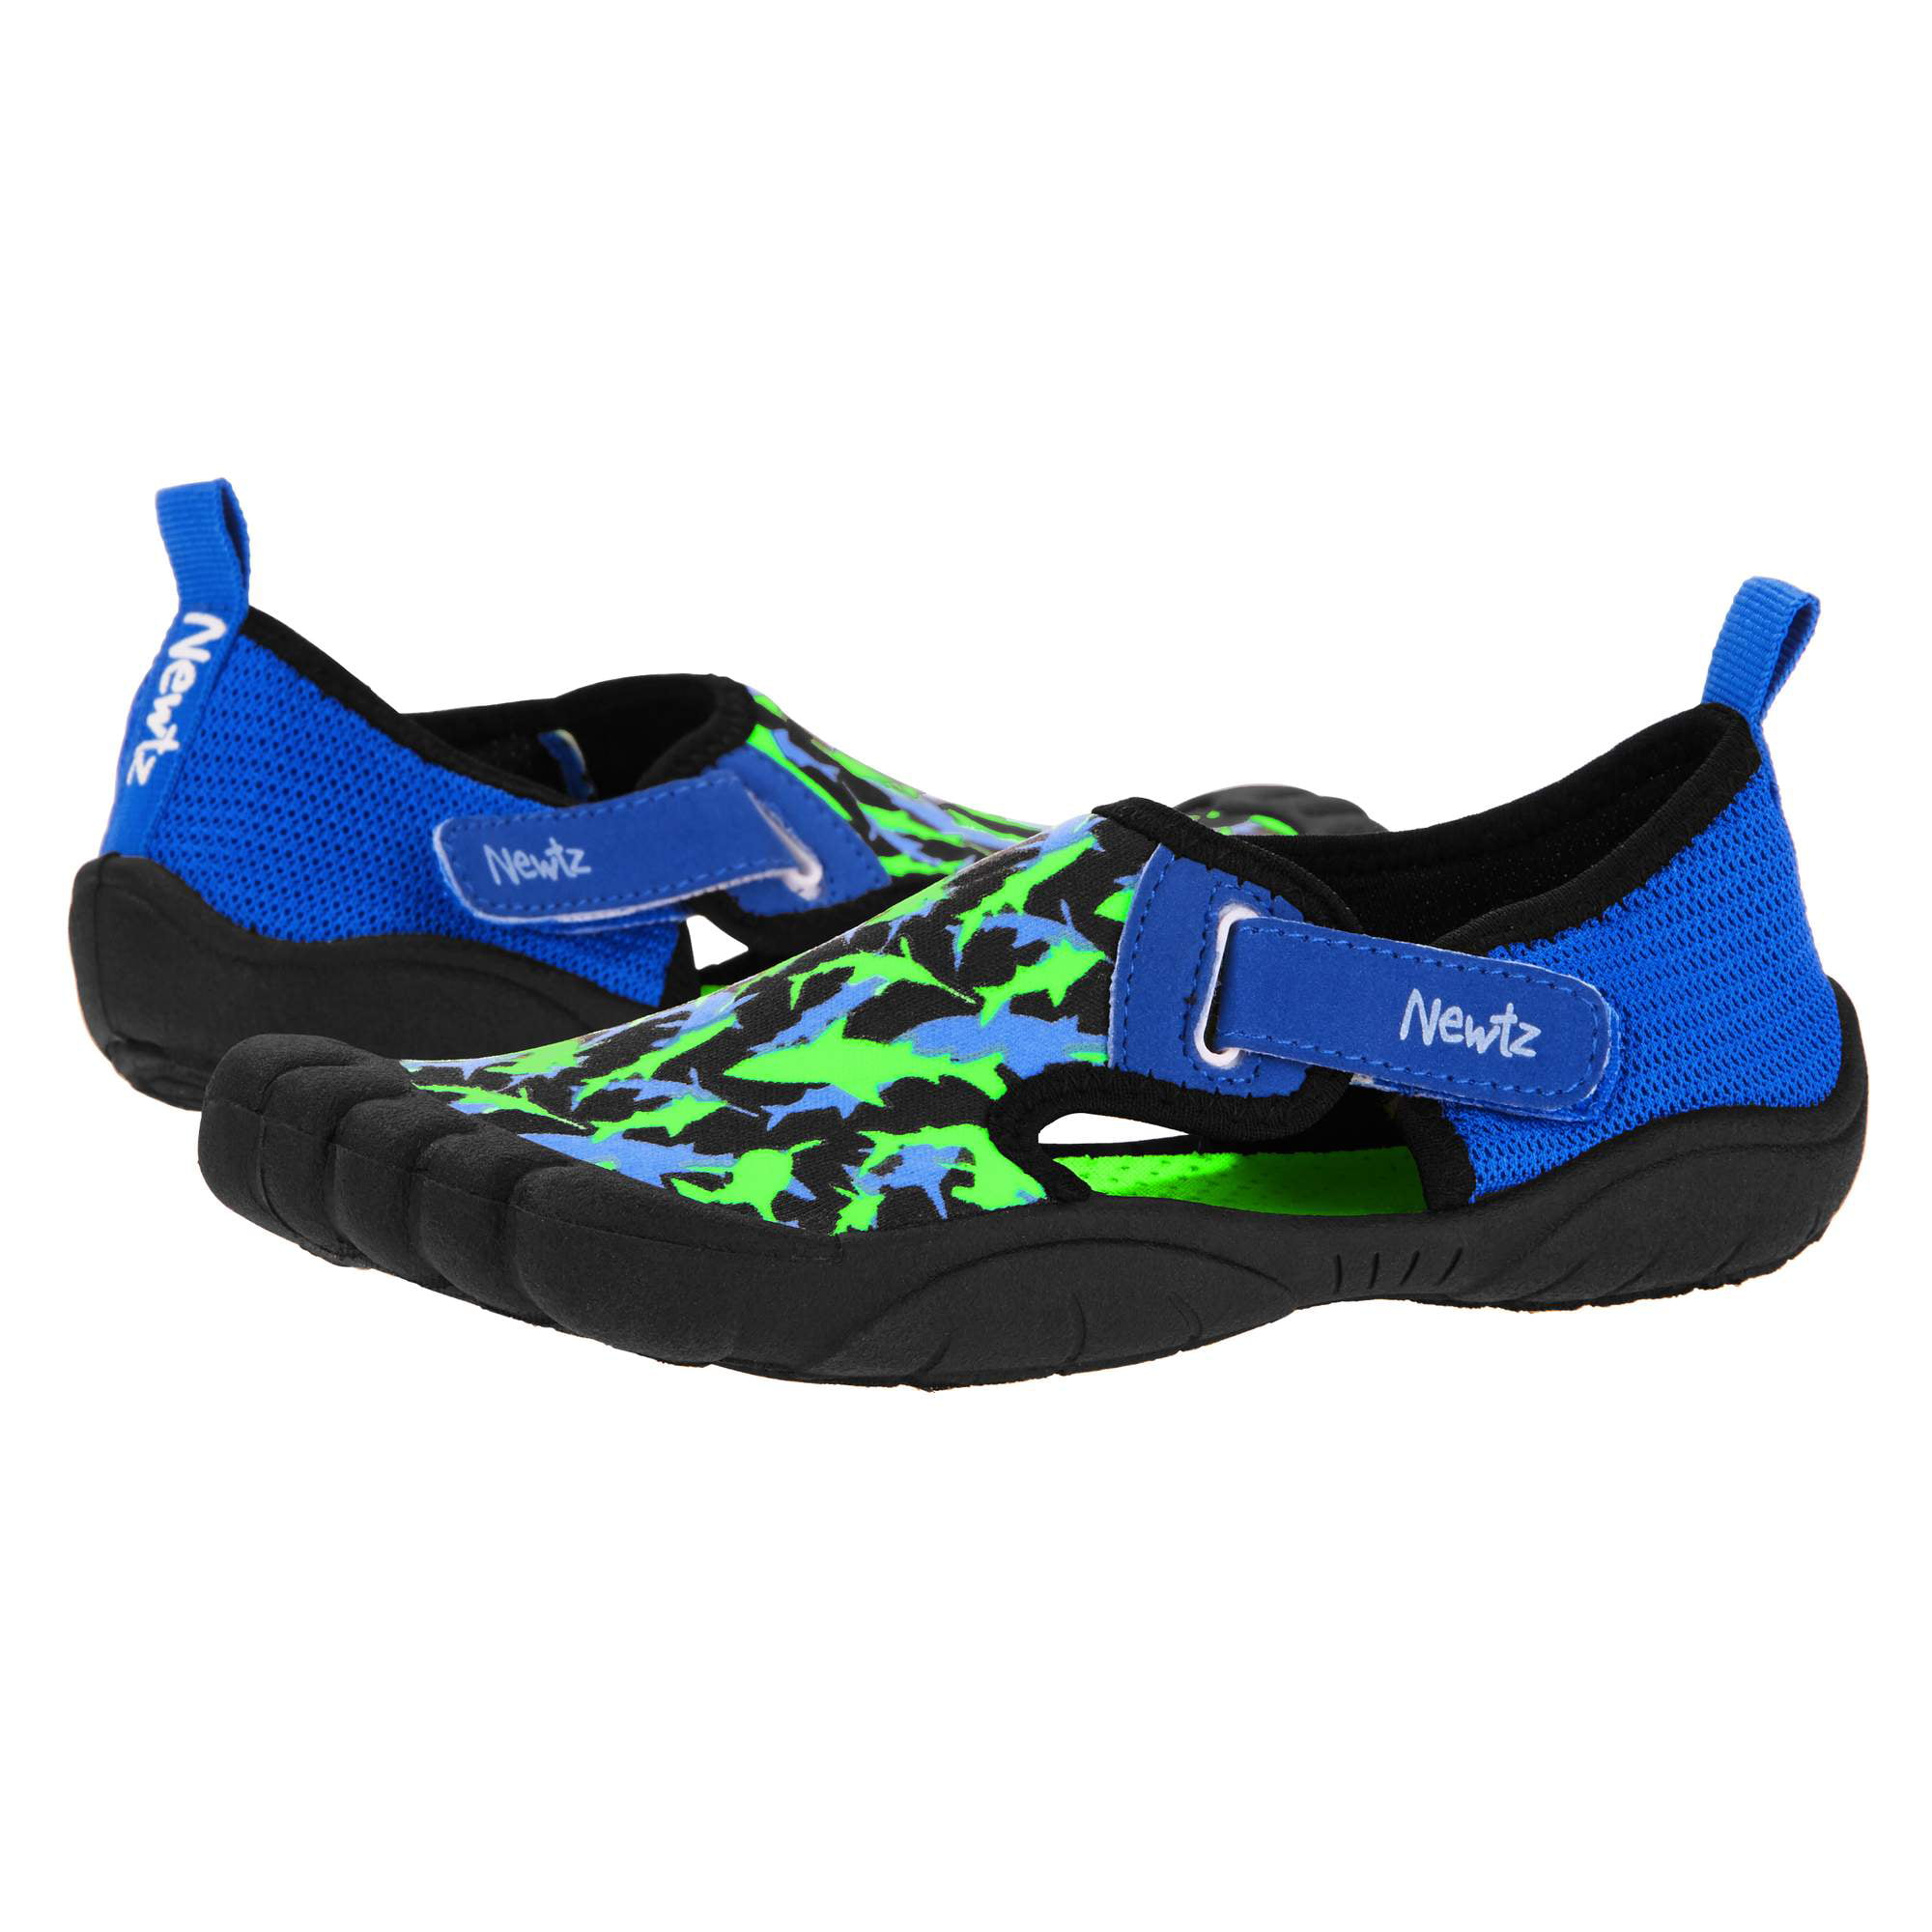 Newtz Kids Youth Water shoes size 6 UPF 50 New 